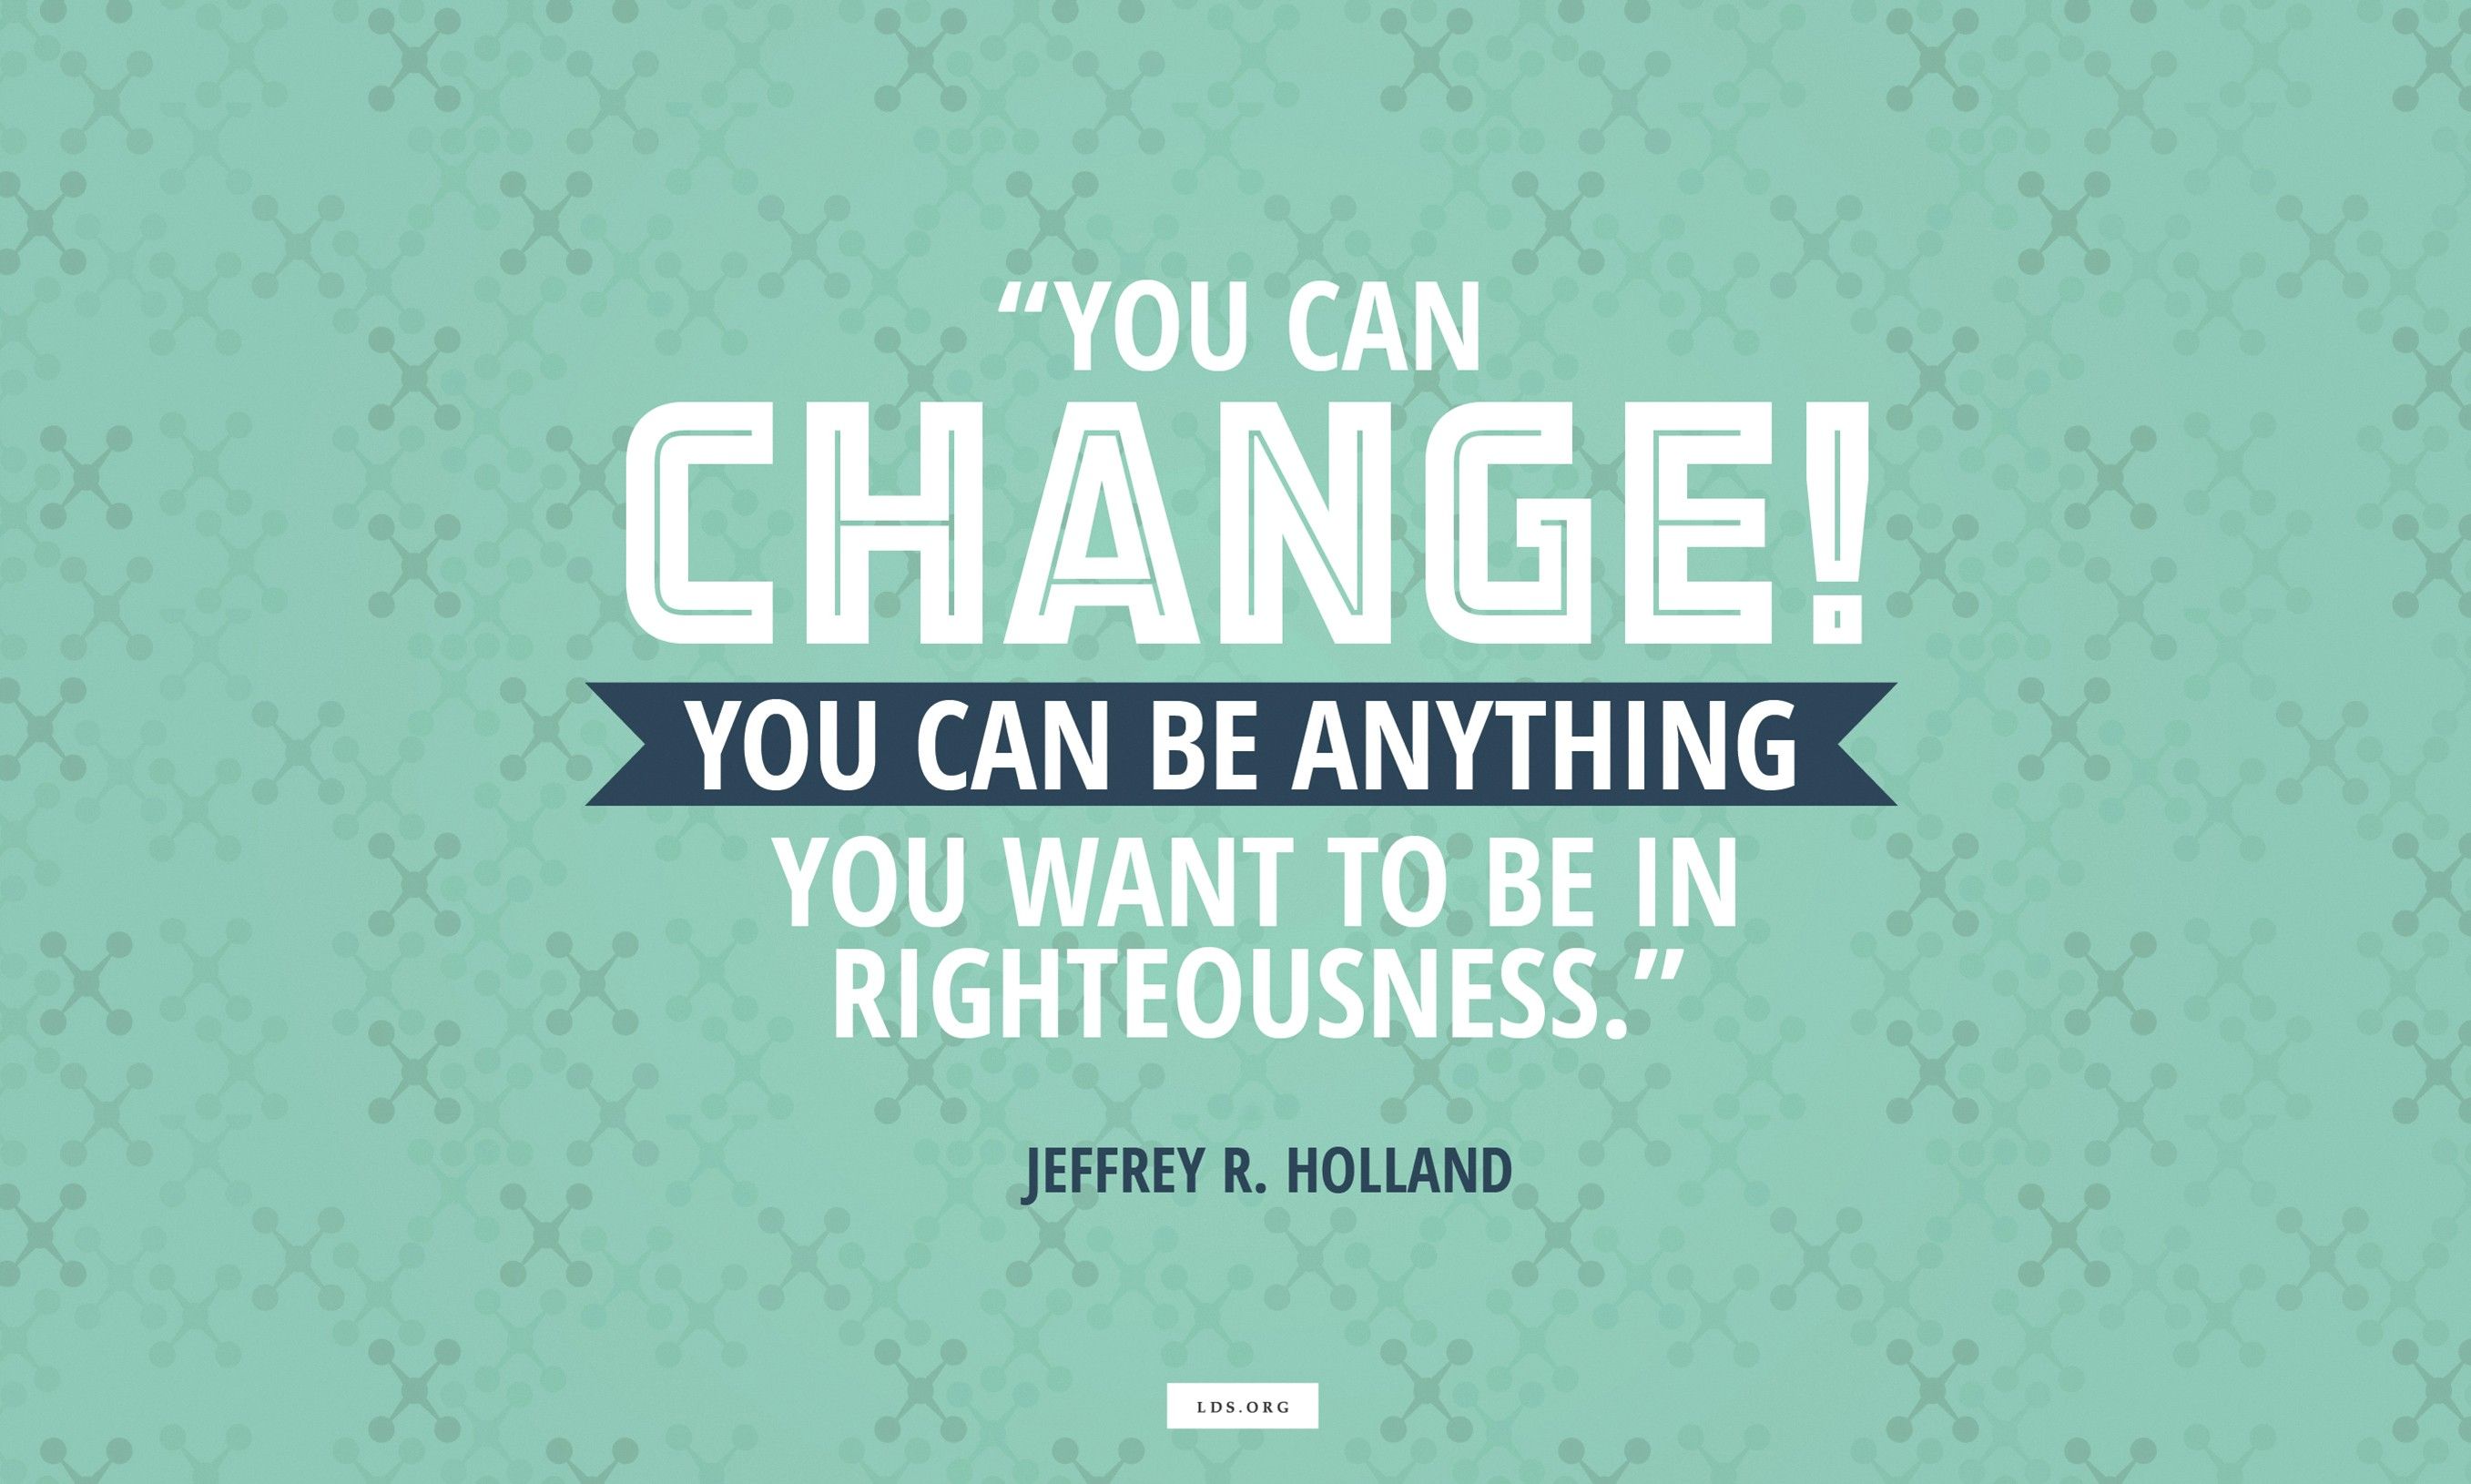 “You can change! You can be anything you want to be in righteousness.”—Elder Jeffrey R. Holland, “For Times of Trouble”